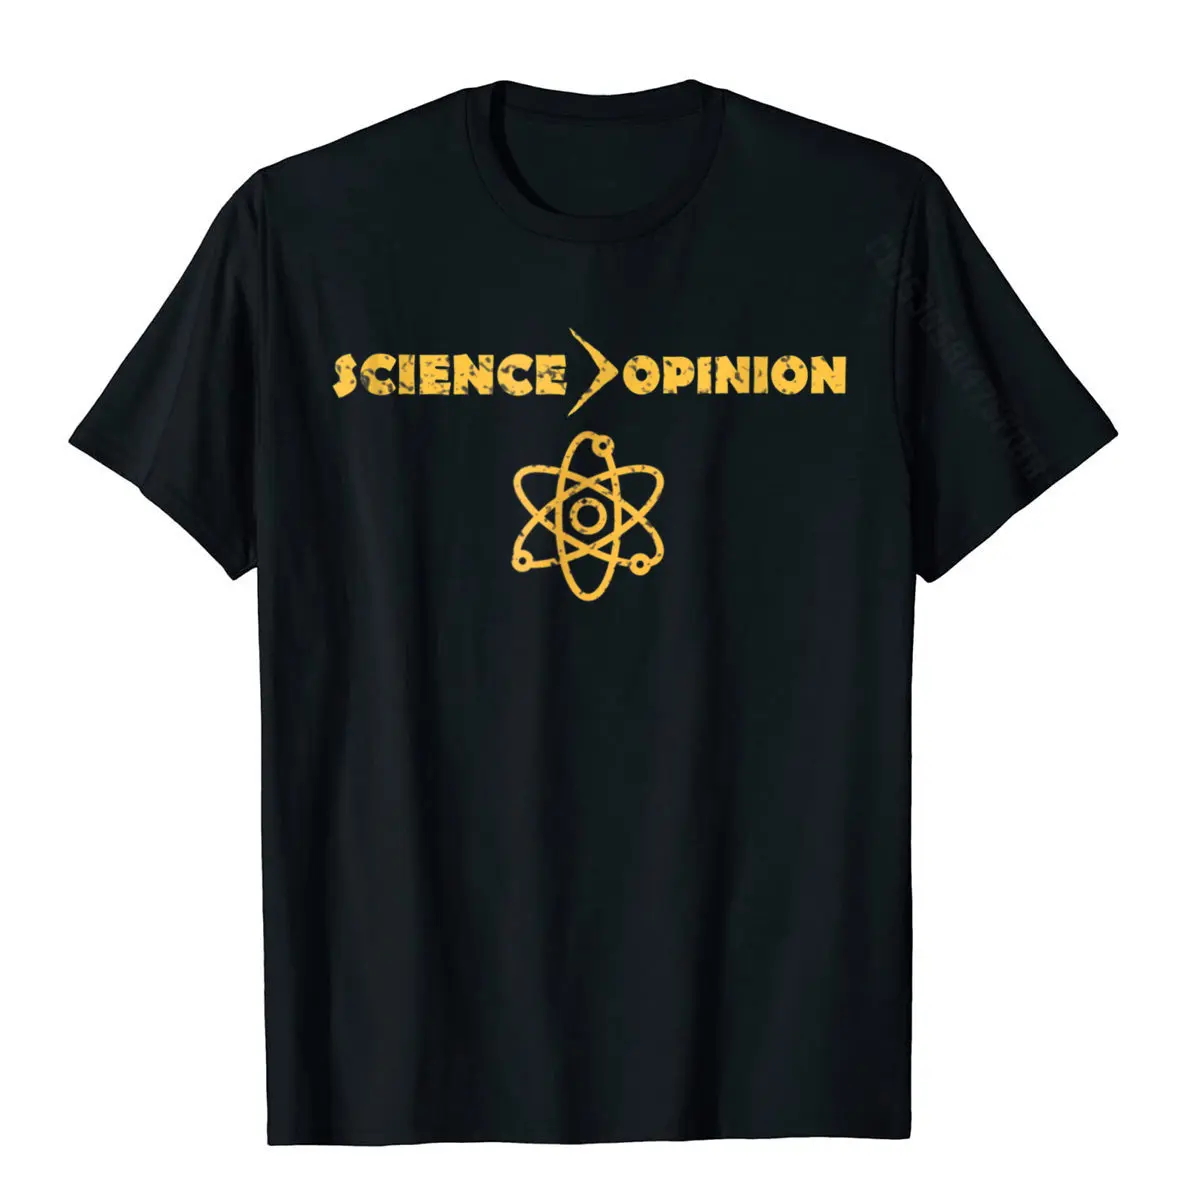 

Science Is Greater Than Opinion Shirt Funny Science Shirt Cotton Top T-Shirts For Men Casual Tops Tees Prevailing Funny